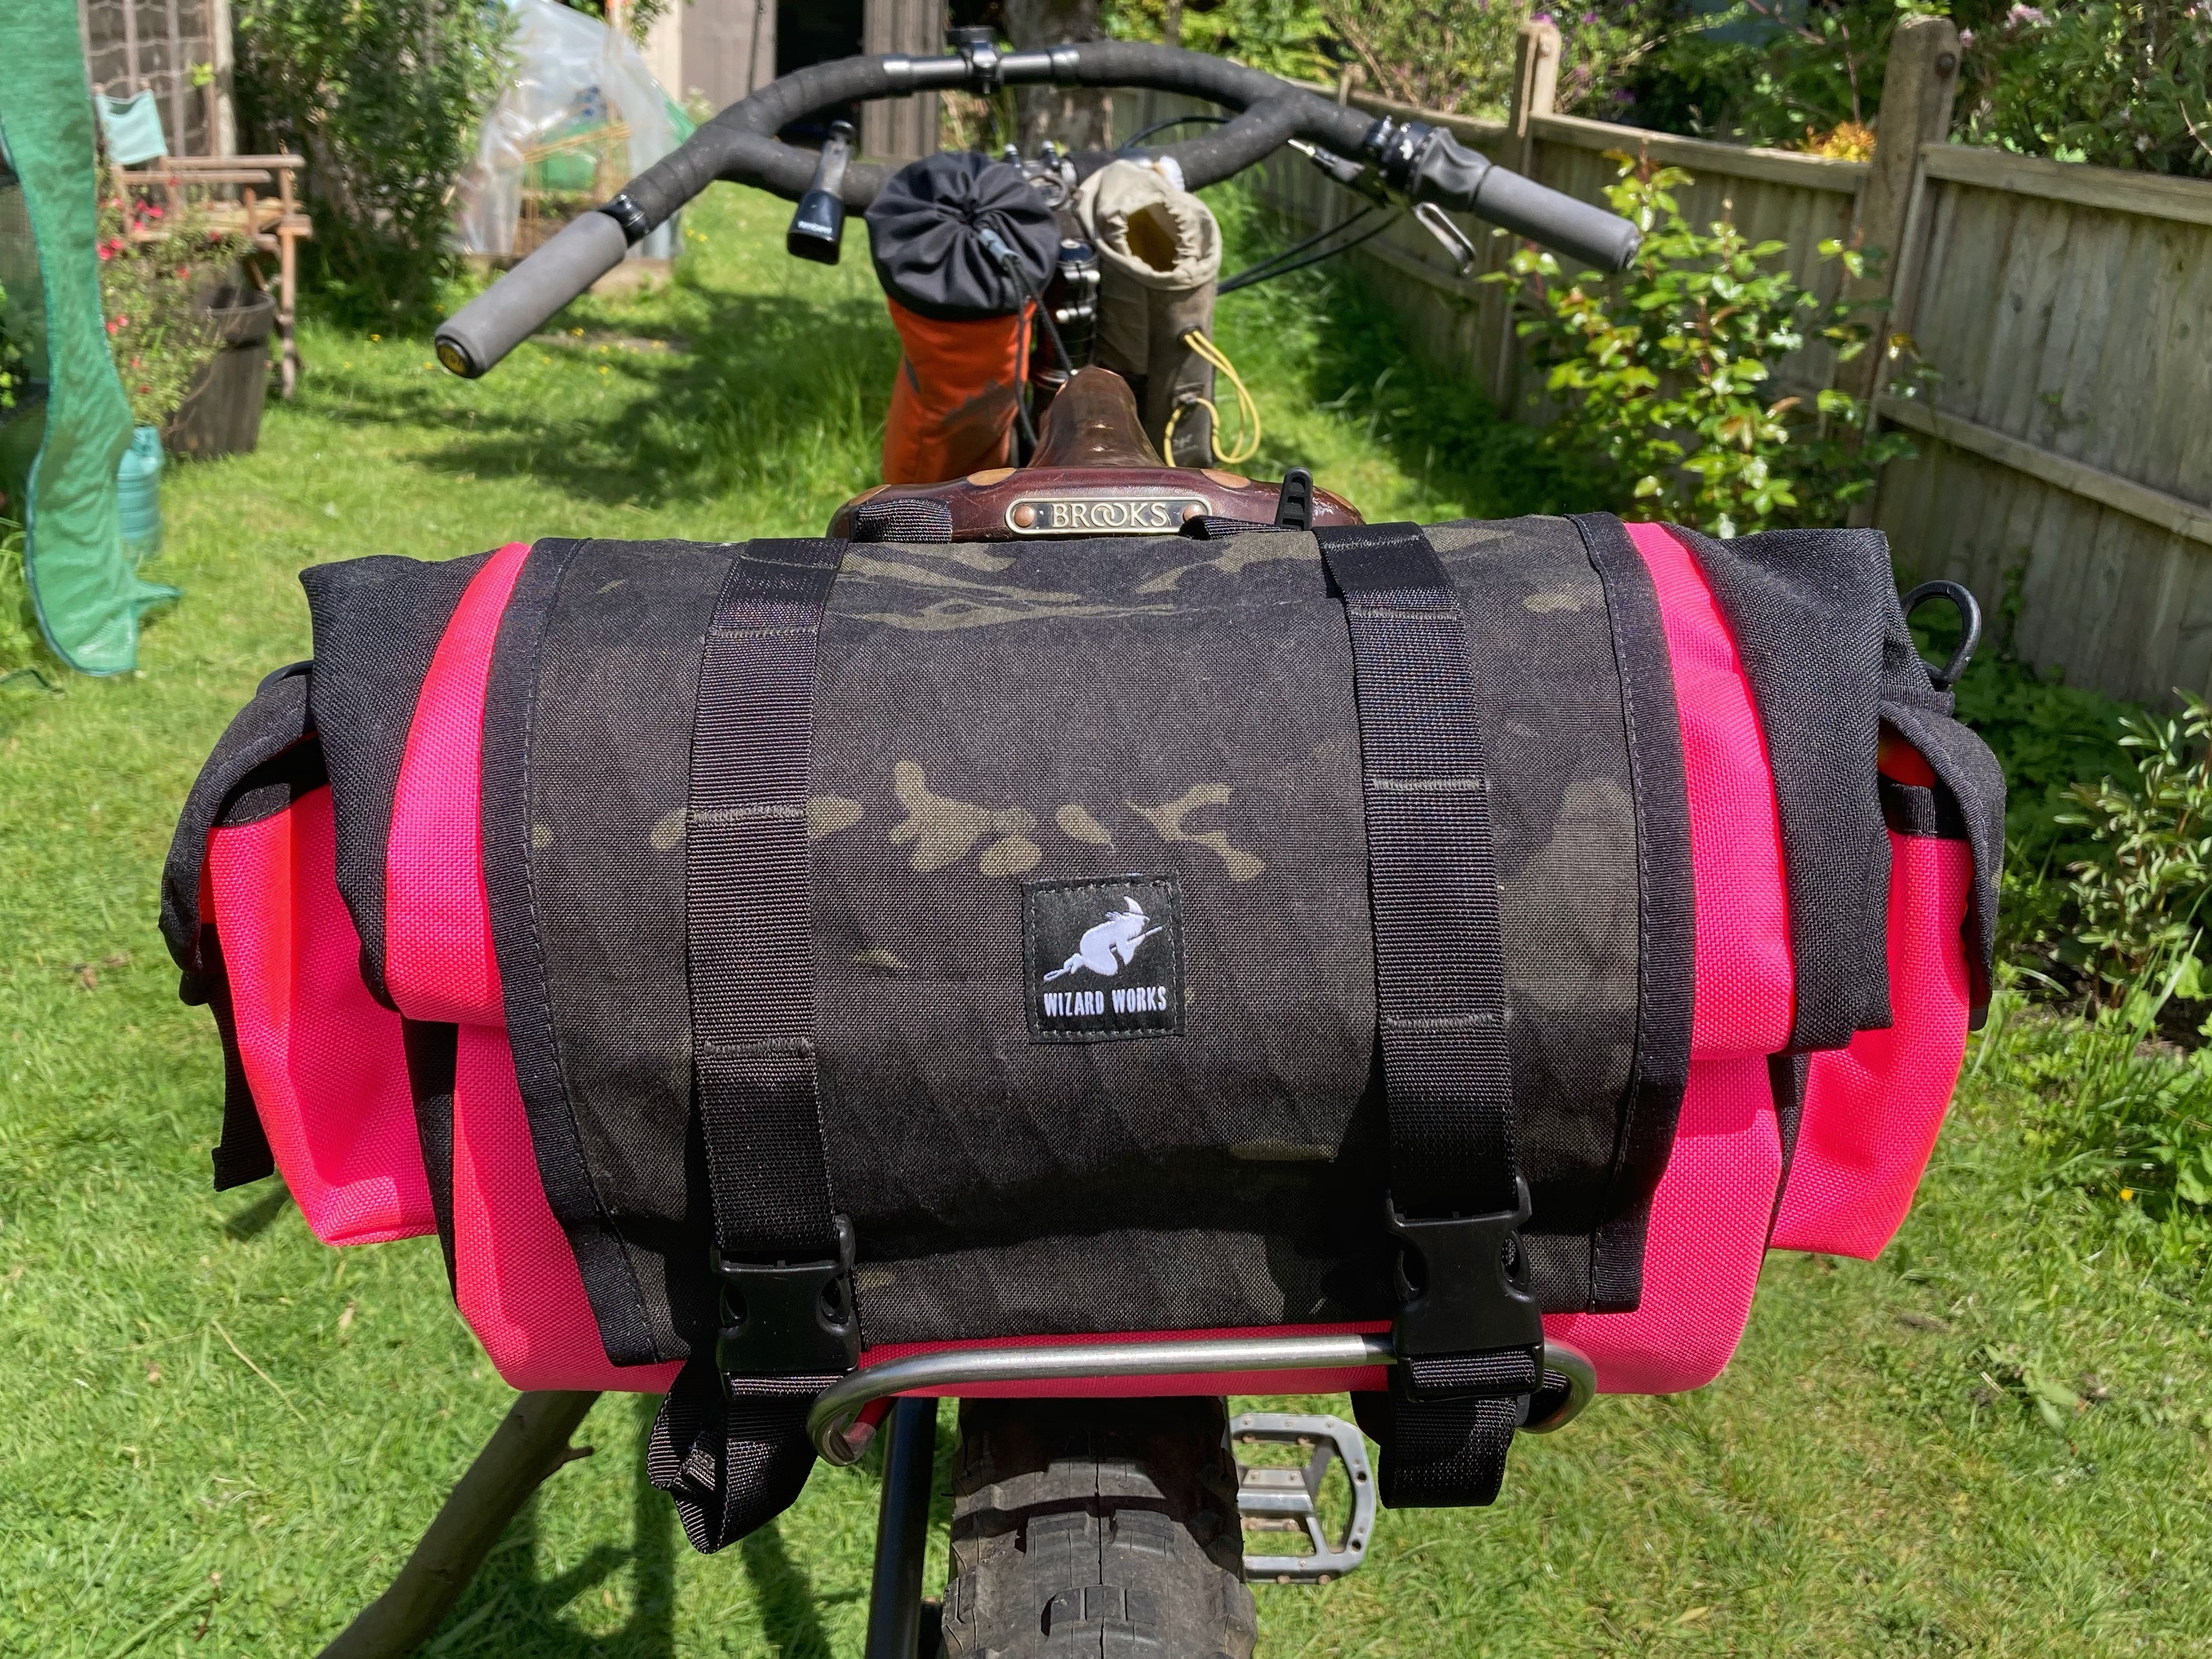 Group test: seatpost bags for bikepacking